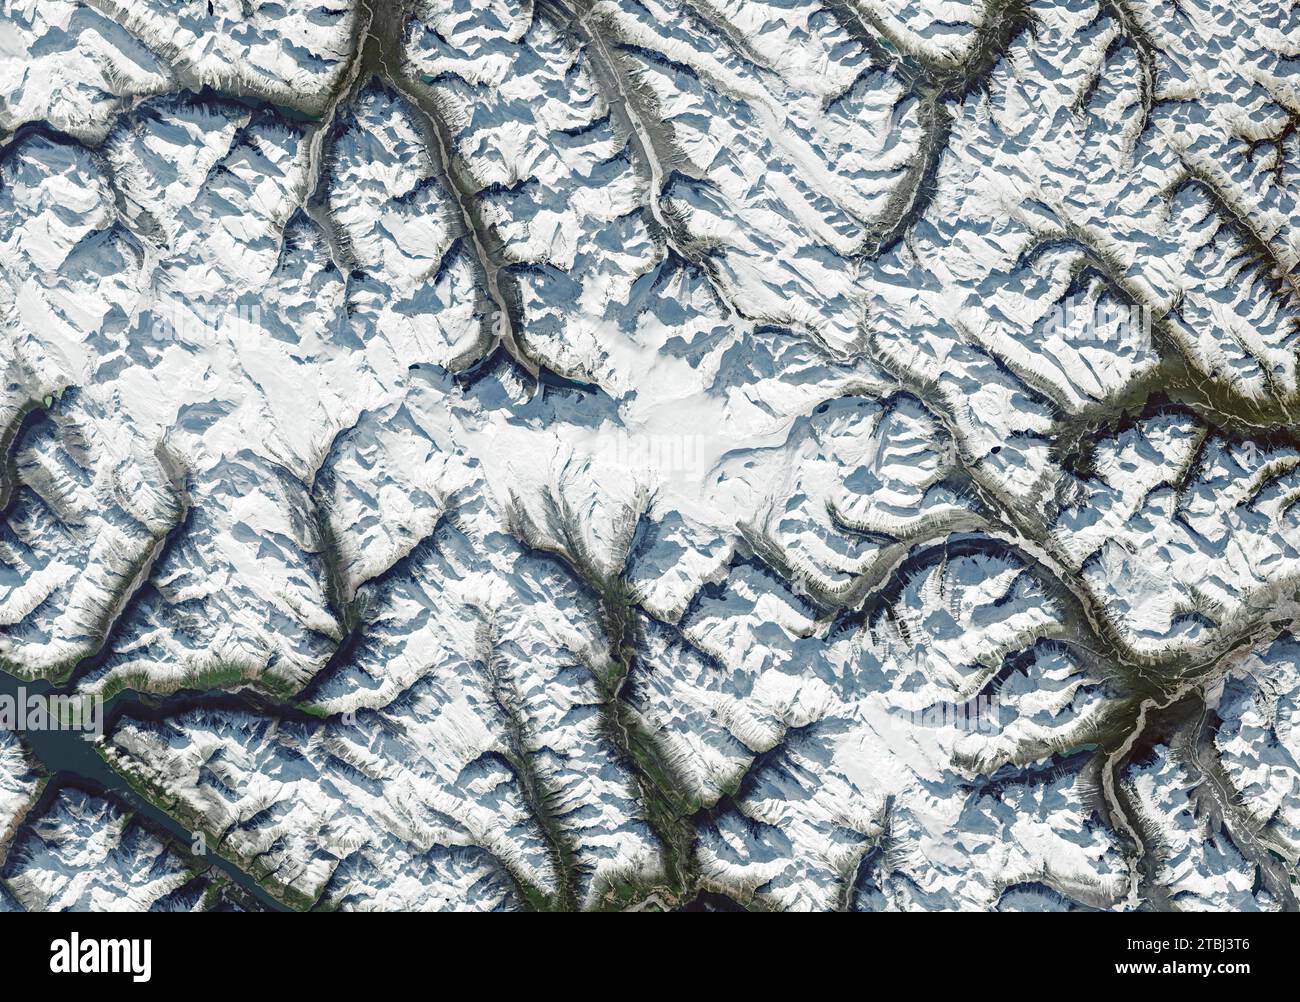 Satellite image of an icefield spanning the provinces of British Columbia and Alberta, Canada. Stock Photo